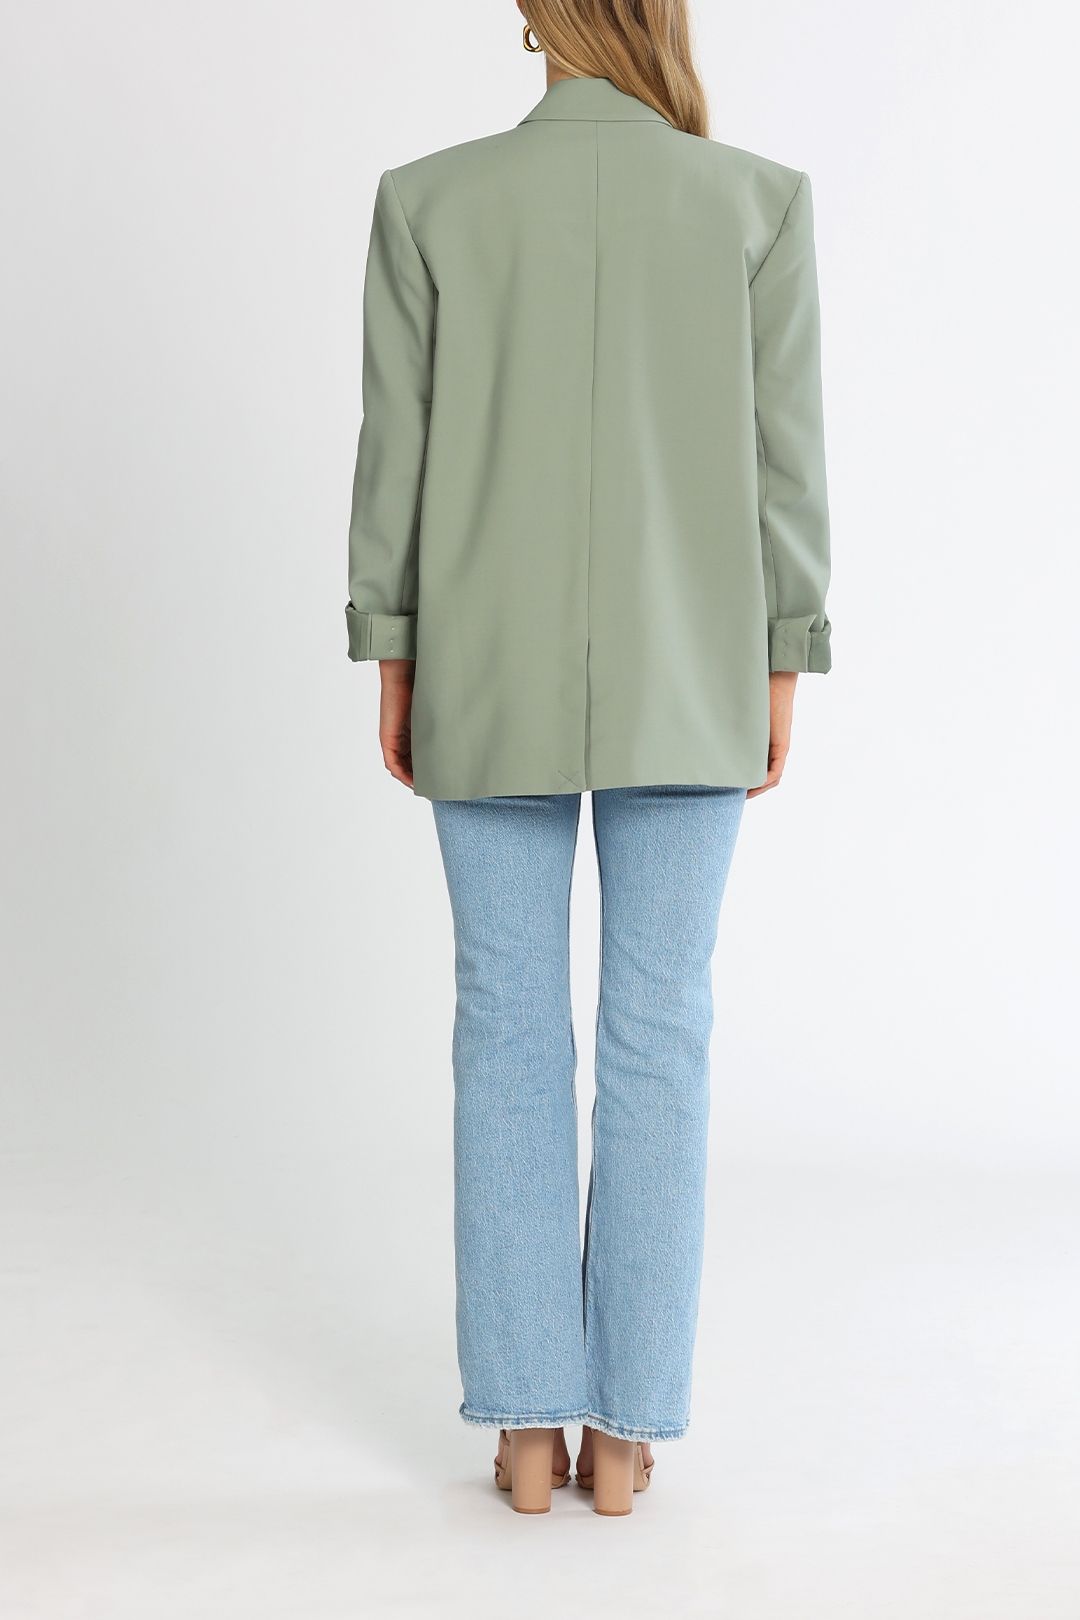 Camilla and Marc Aston Jacket Dusty Jade Relaxed Fit